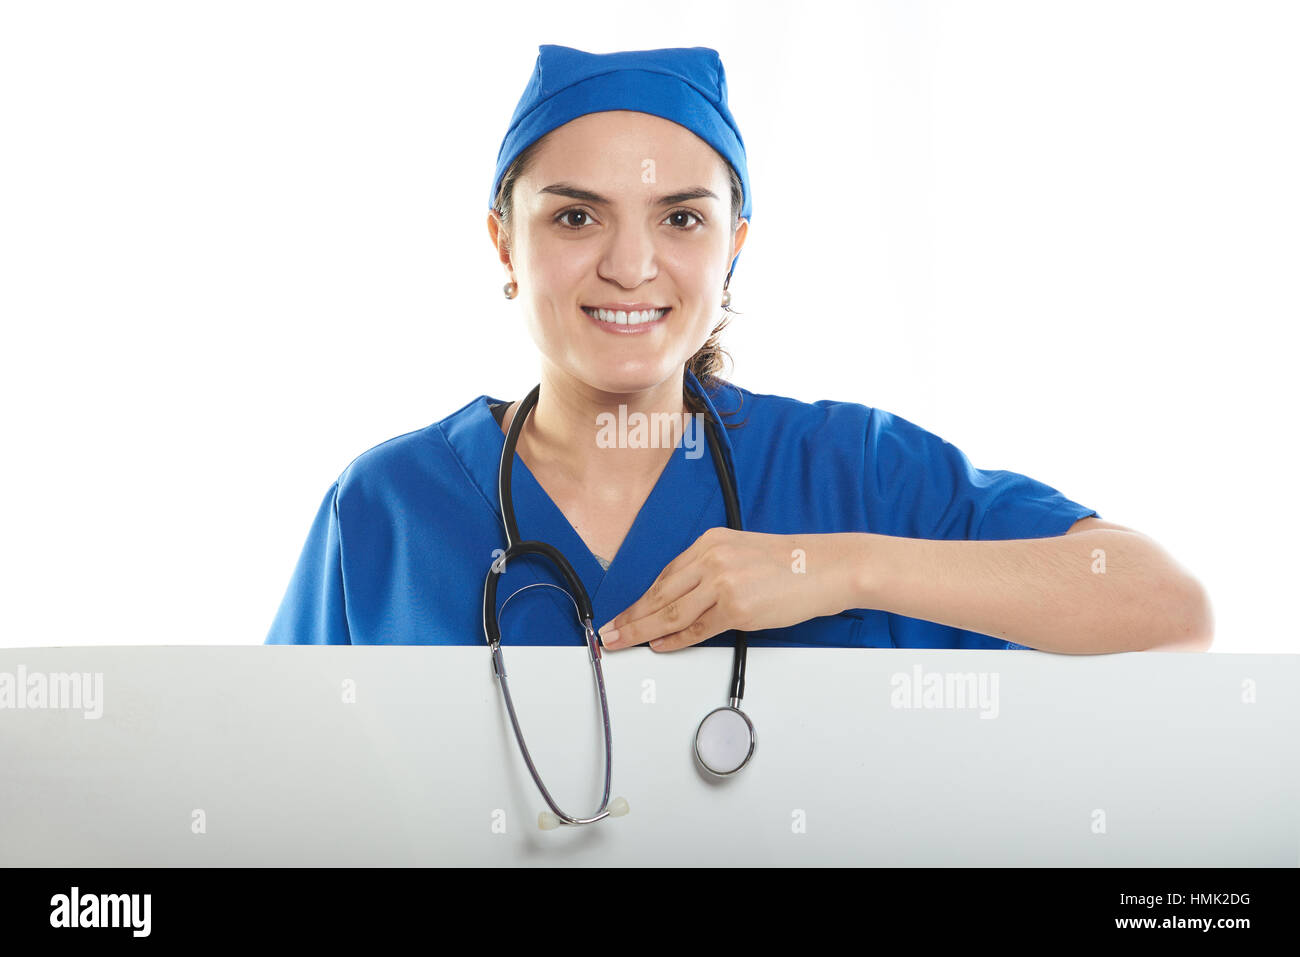 young girl surgeon doctor with a big white sign Stock Photo